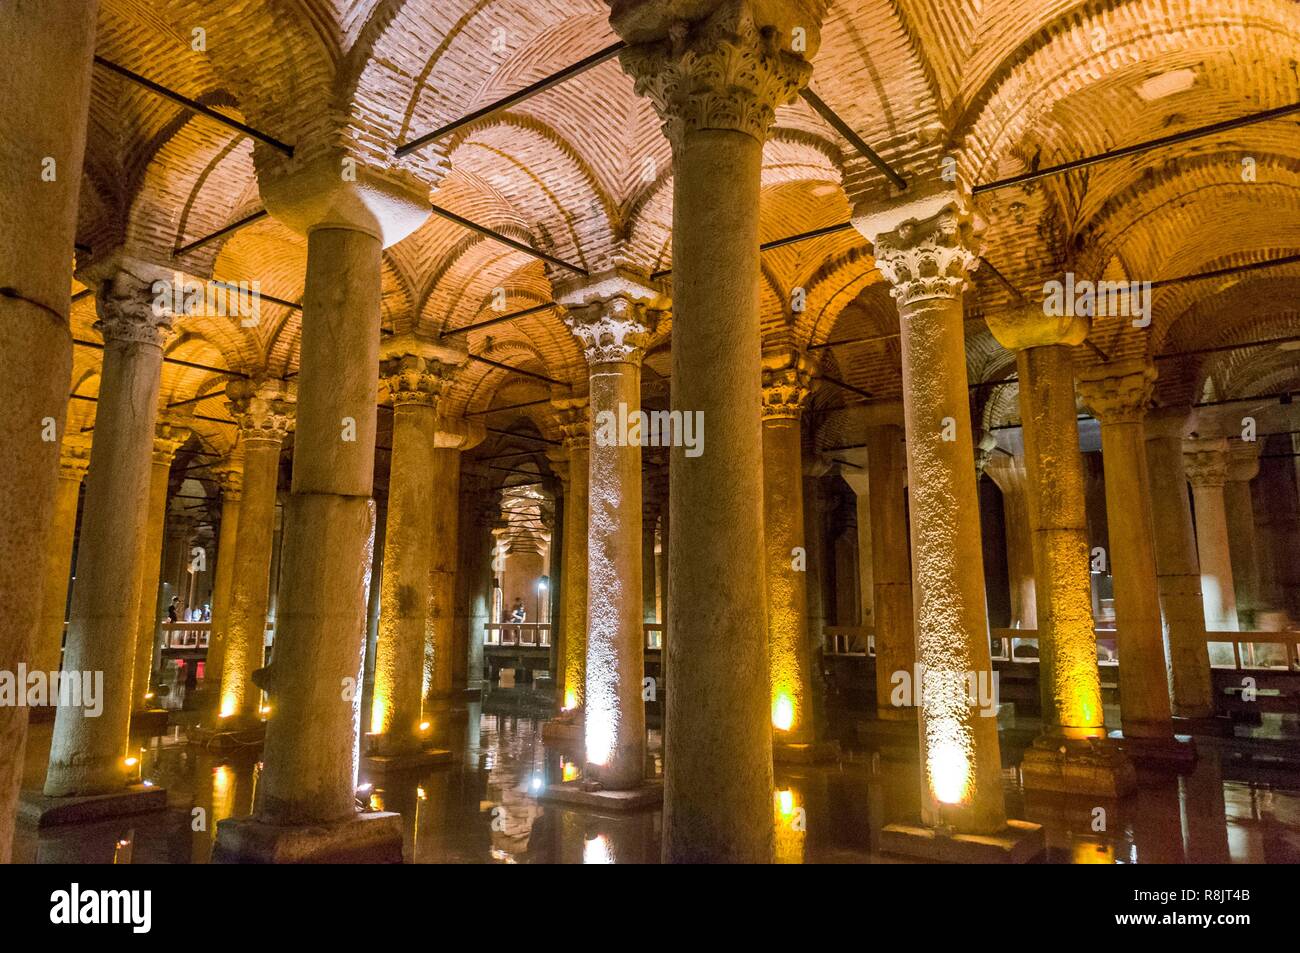 Turkey, Istanbul, historical centre listed as World Heritage by UNESCO, Sultanahmet District, Yerebatan Sarayi Cistern, ancient cistern lying beneath the ground built by Byzantine Emperor Justinian Stock Photo